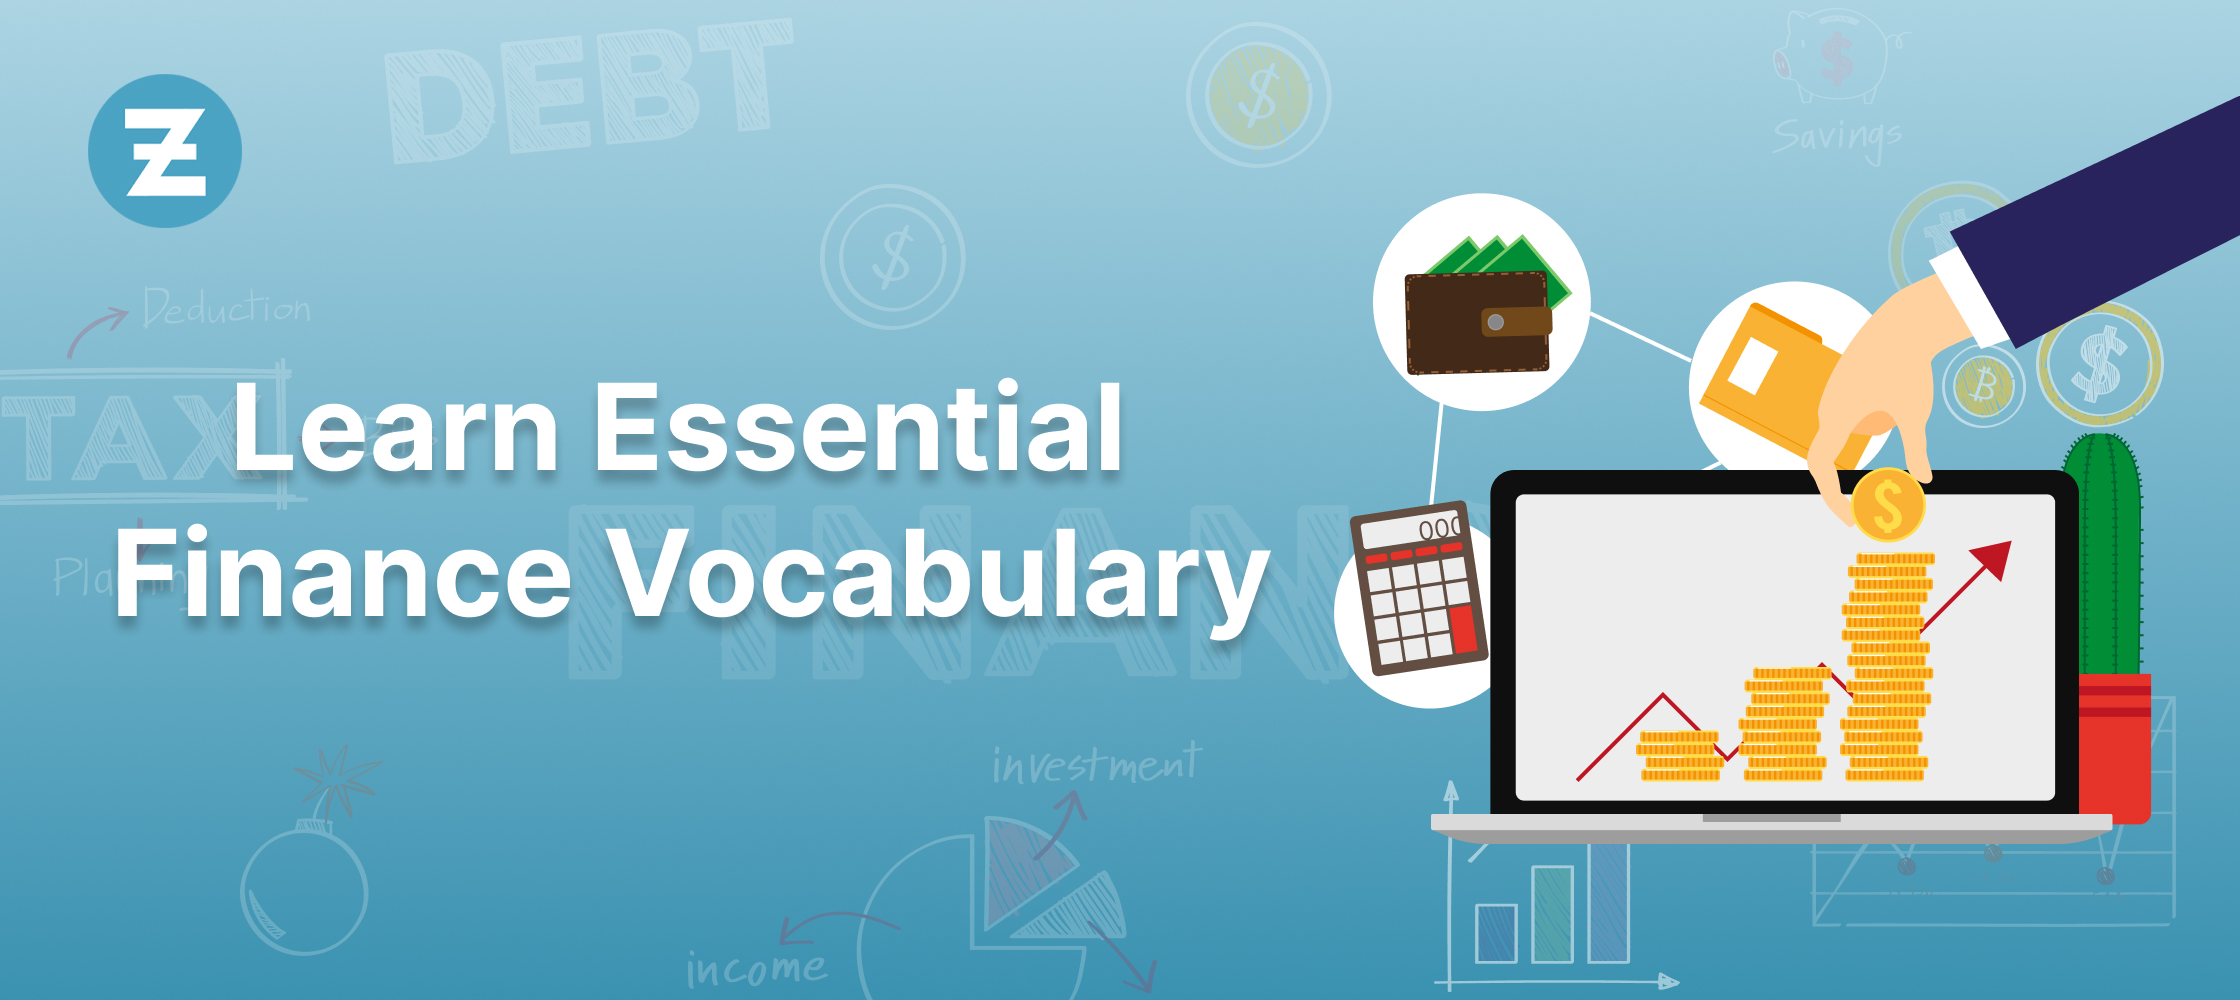 Learn Essential Finance Vocabulary